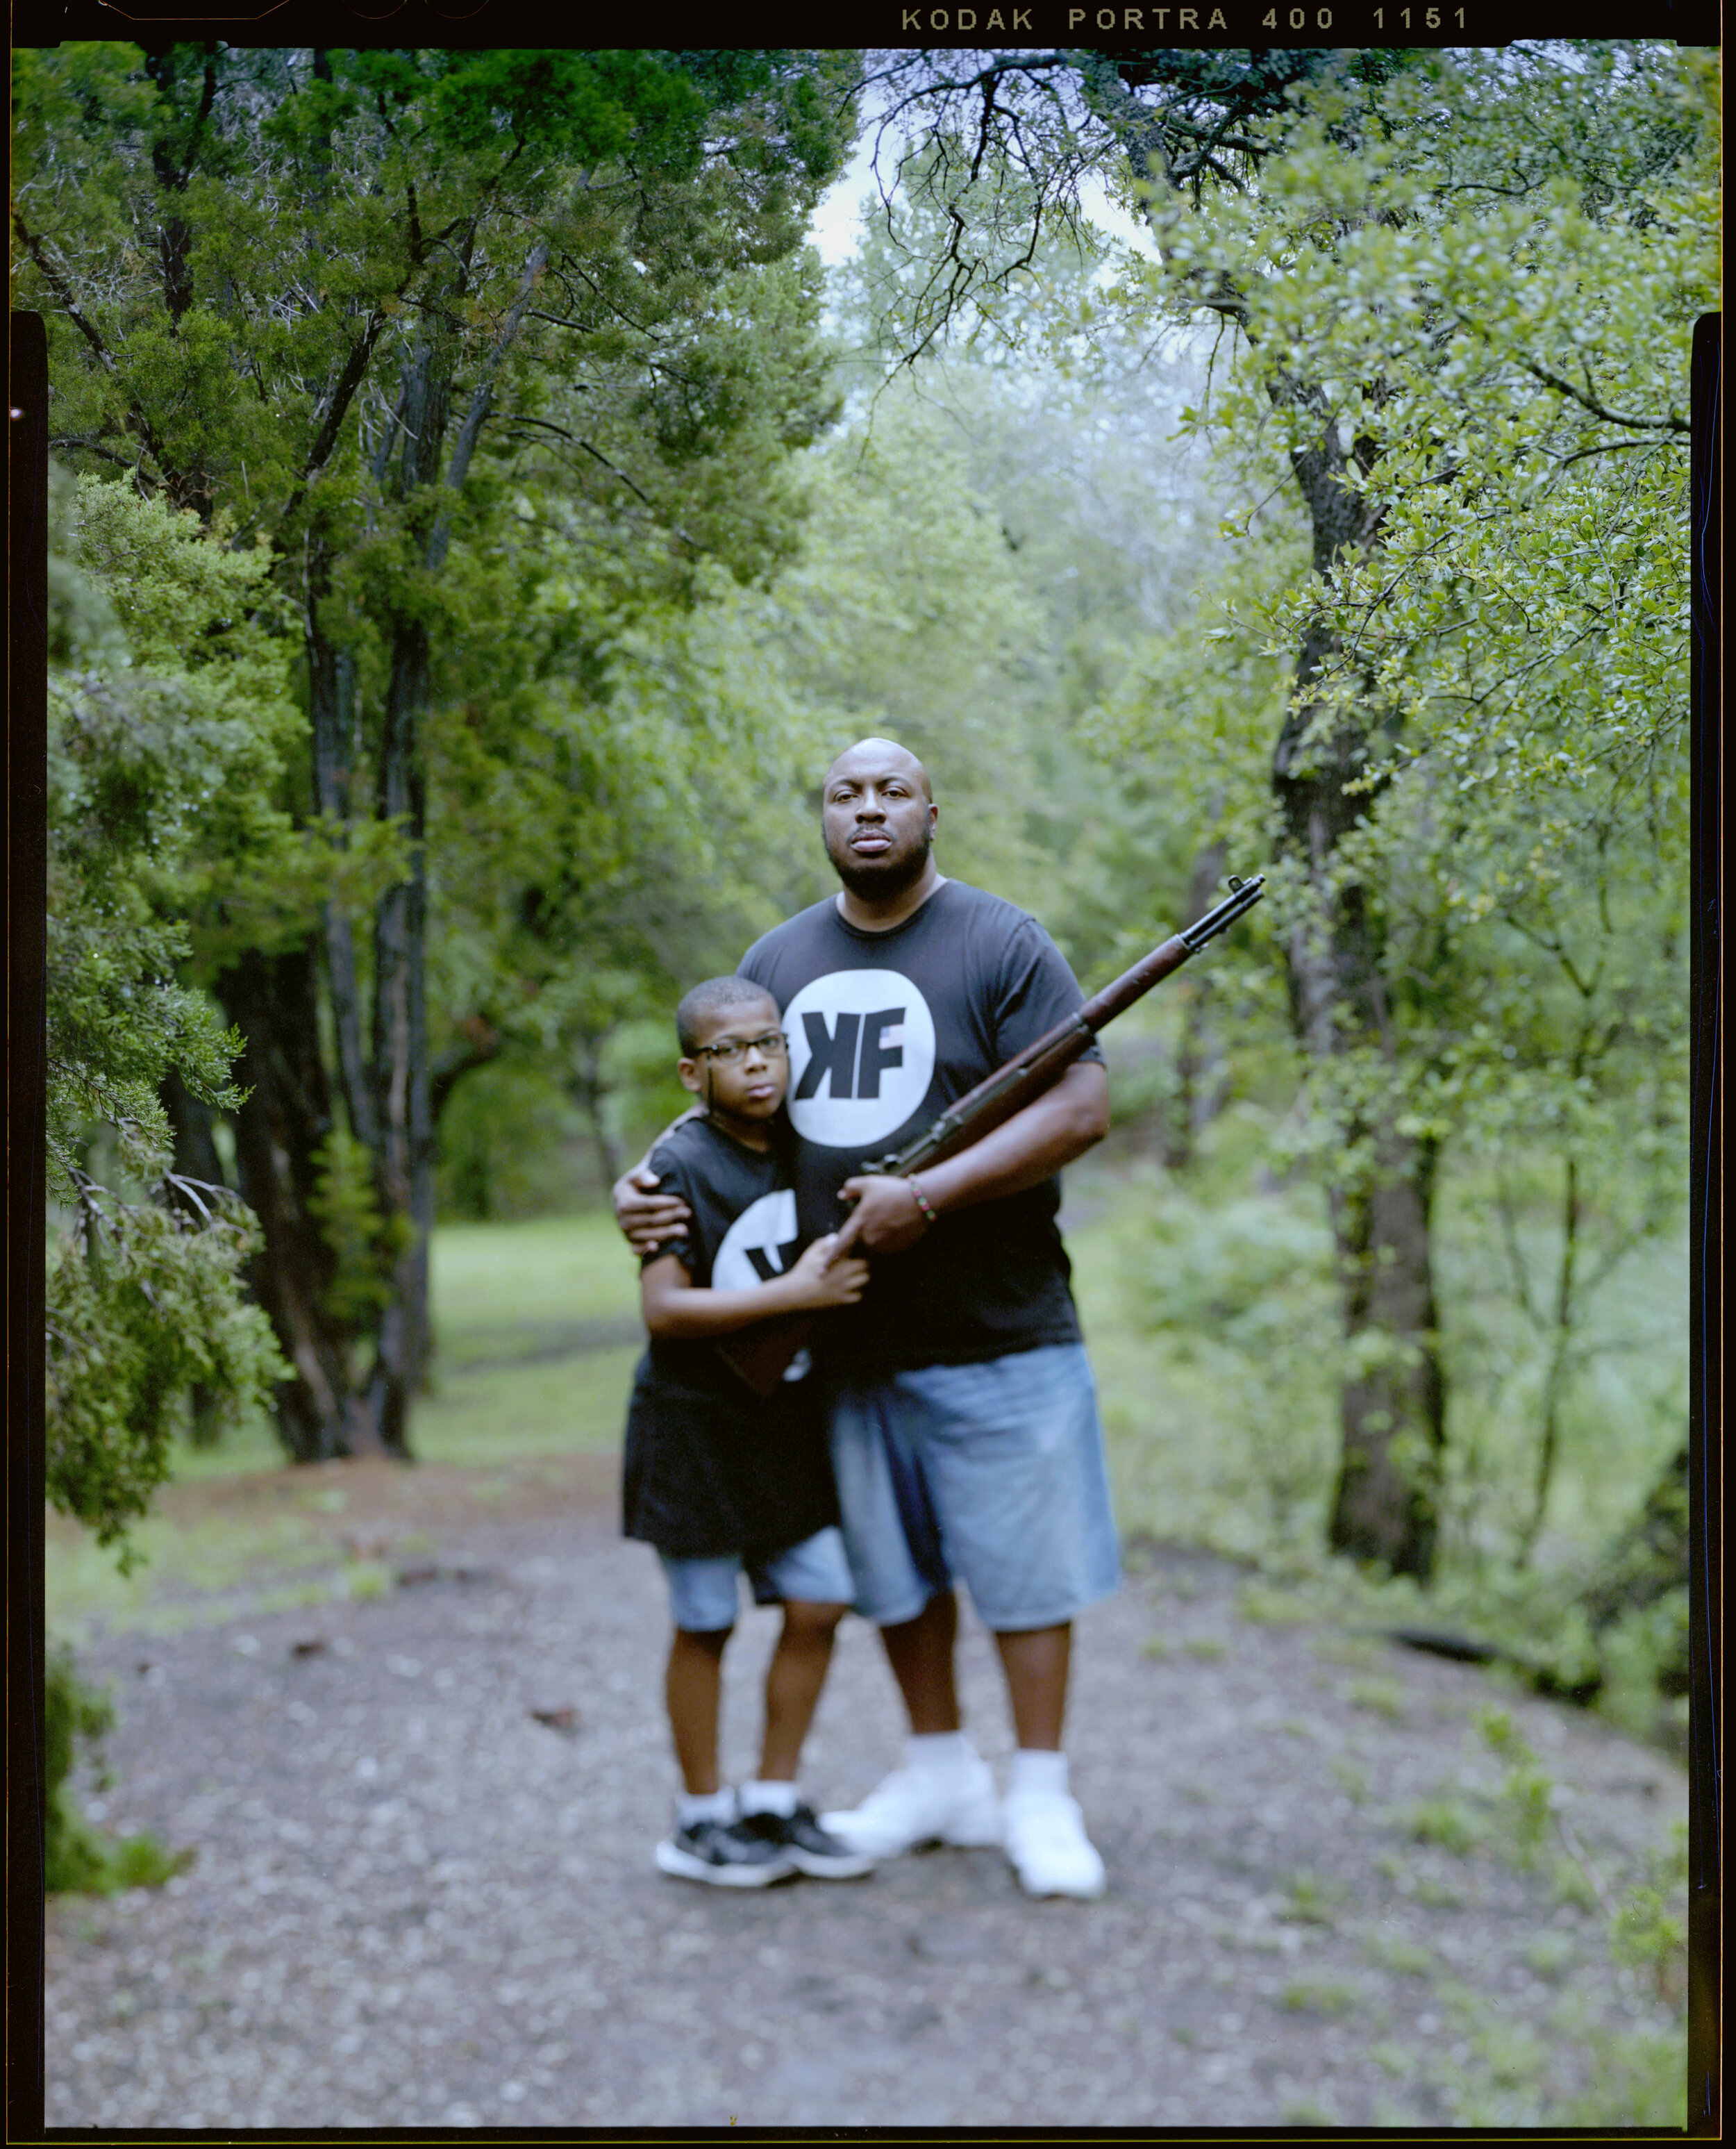 Aaron Banks, 38, and his son Aaron Banks Jr., 08, embrace at a local park  on Saturday, May 22, 2021 in Cedar Park, Tx.  “The image of the average gun enthusiast needs an update,” Mr Banks said. He is the President of Keep Firing LLC where he has made his son the CEO.  Currently he is one of 24 Pistol Instructors certified by the National African American Gun Association.